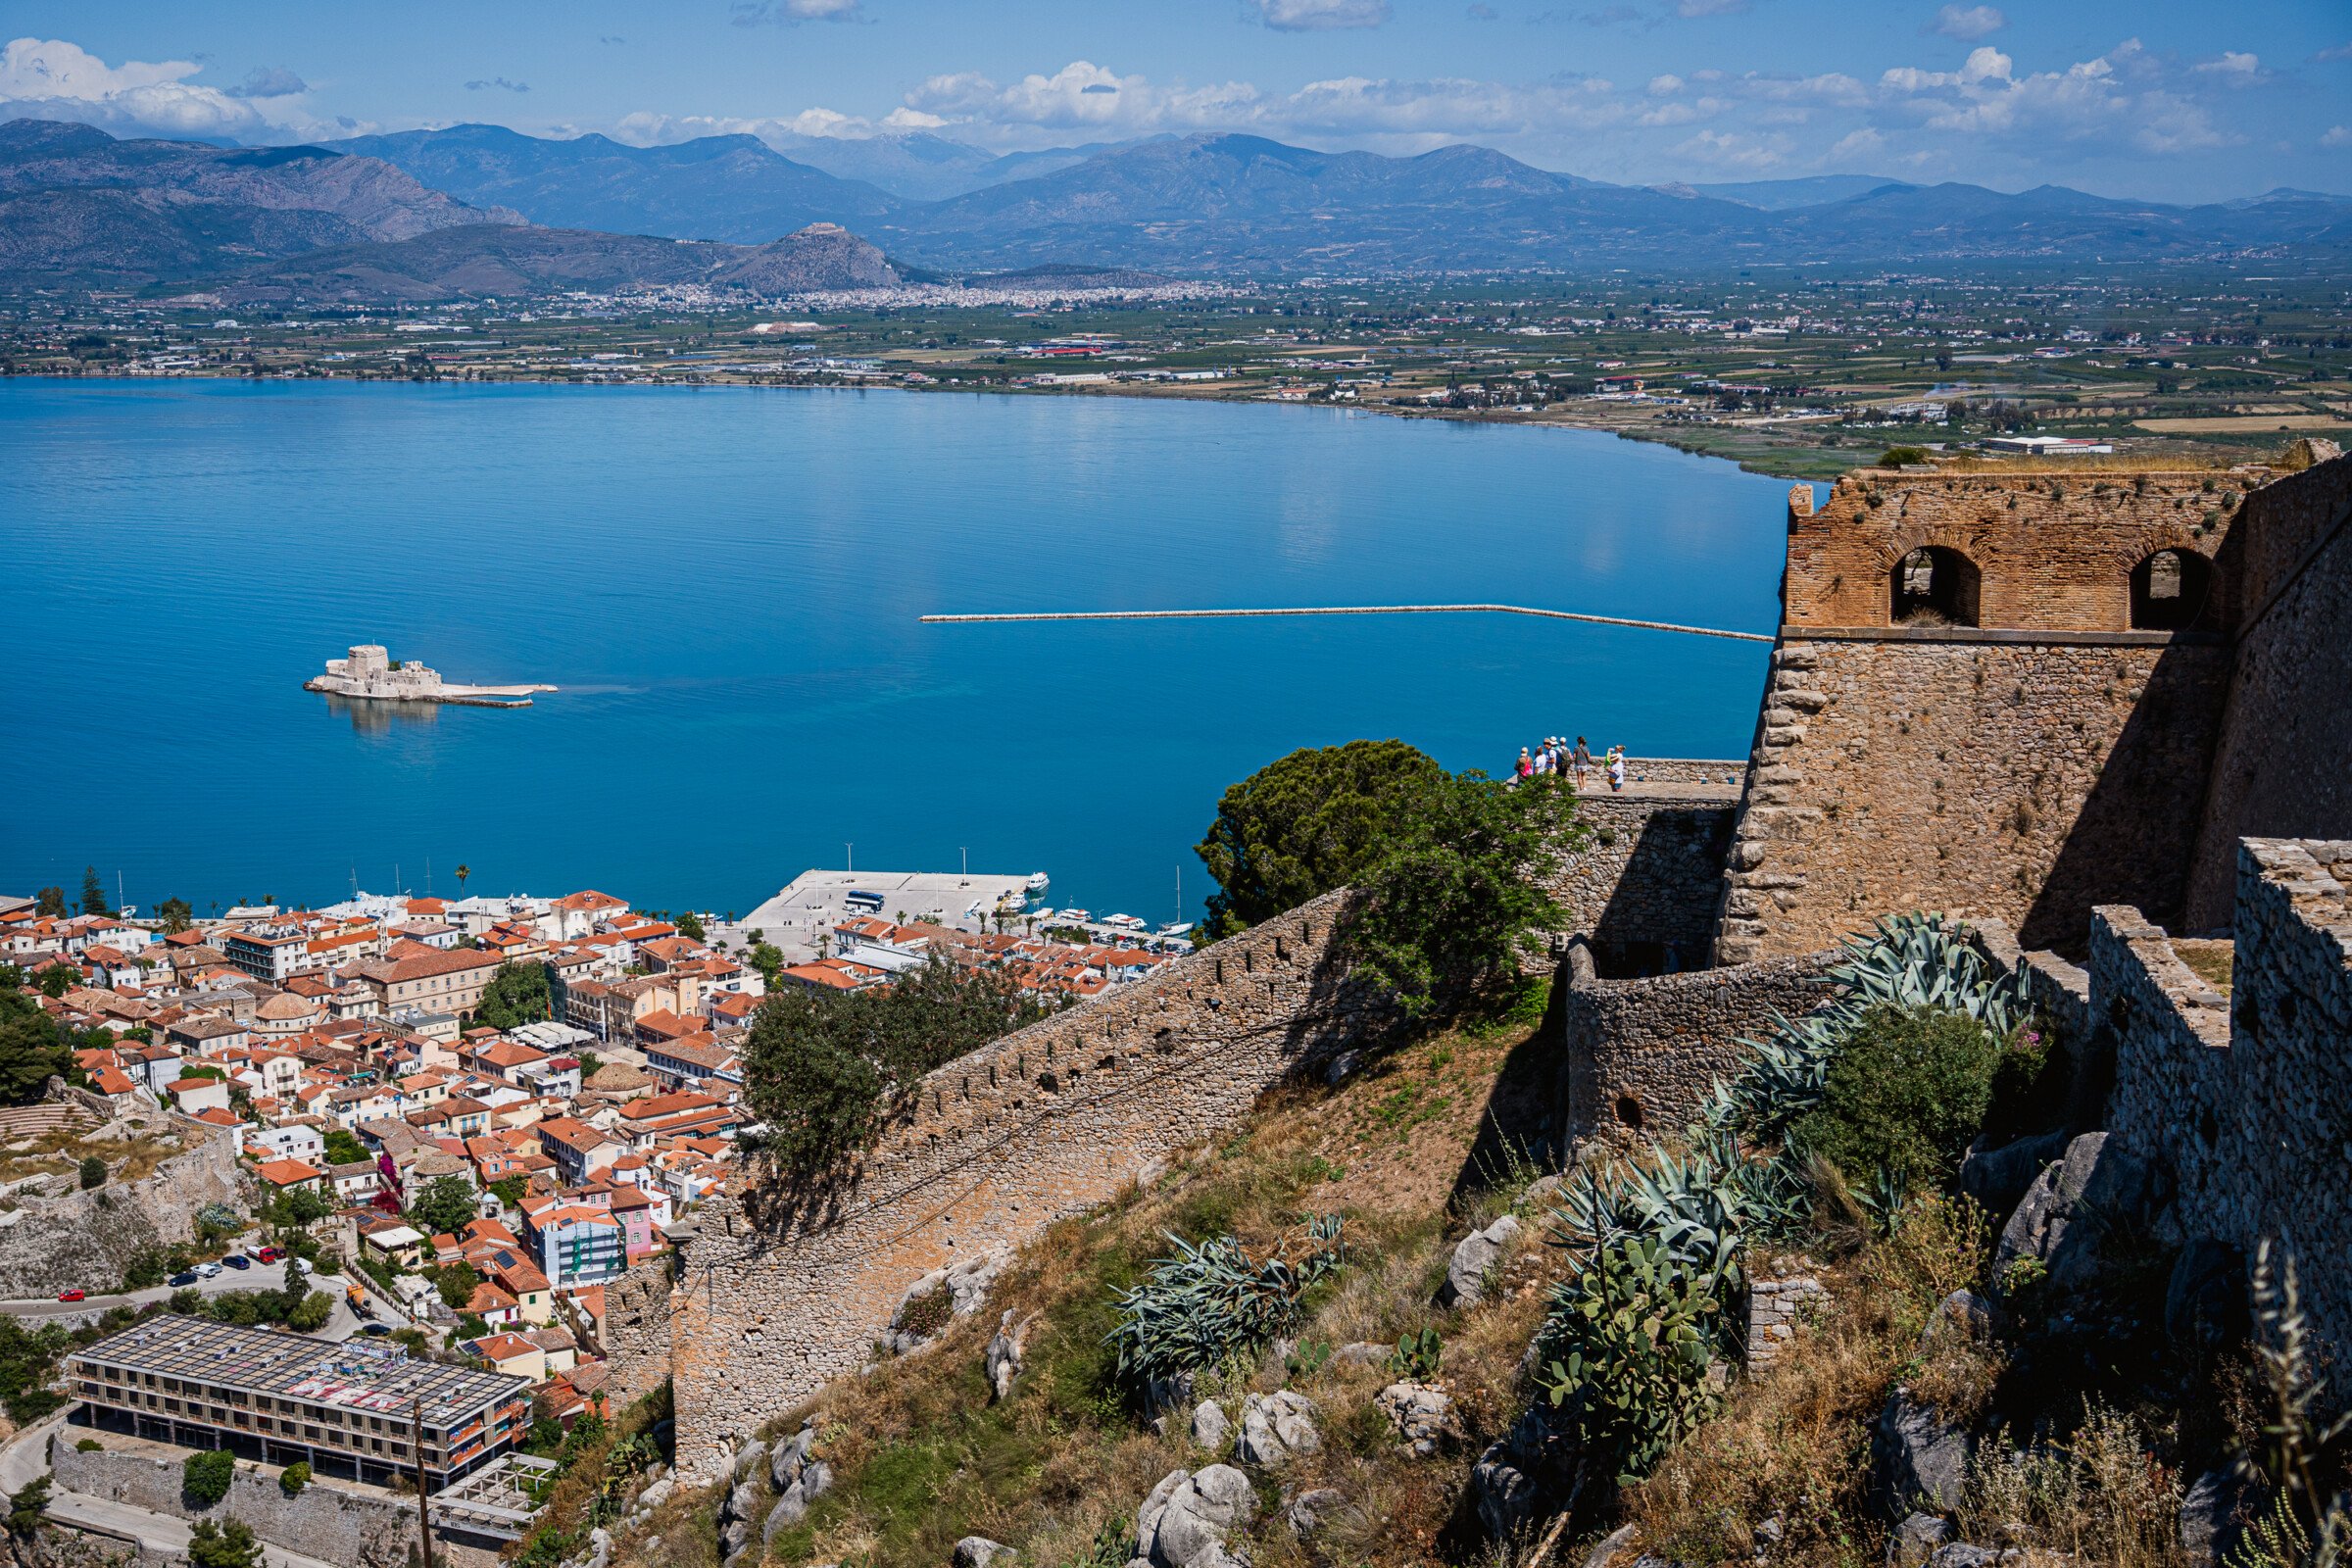 This is a panoramic view of the city of Nafplio, the surrounding countryside, the sea, and Bourtzi, as seen from Palamidi. 